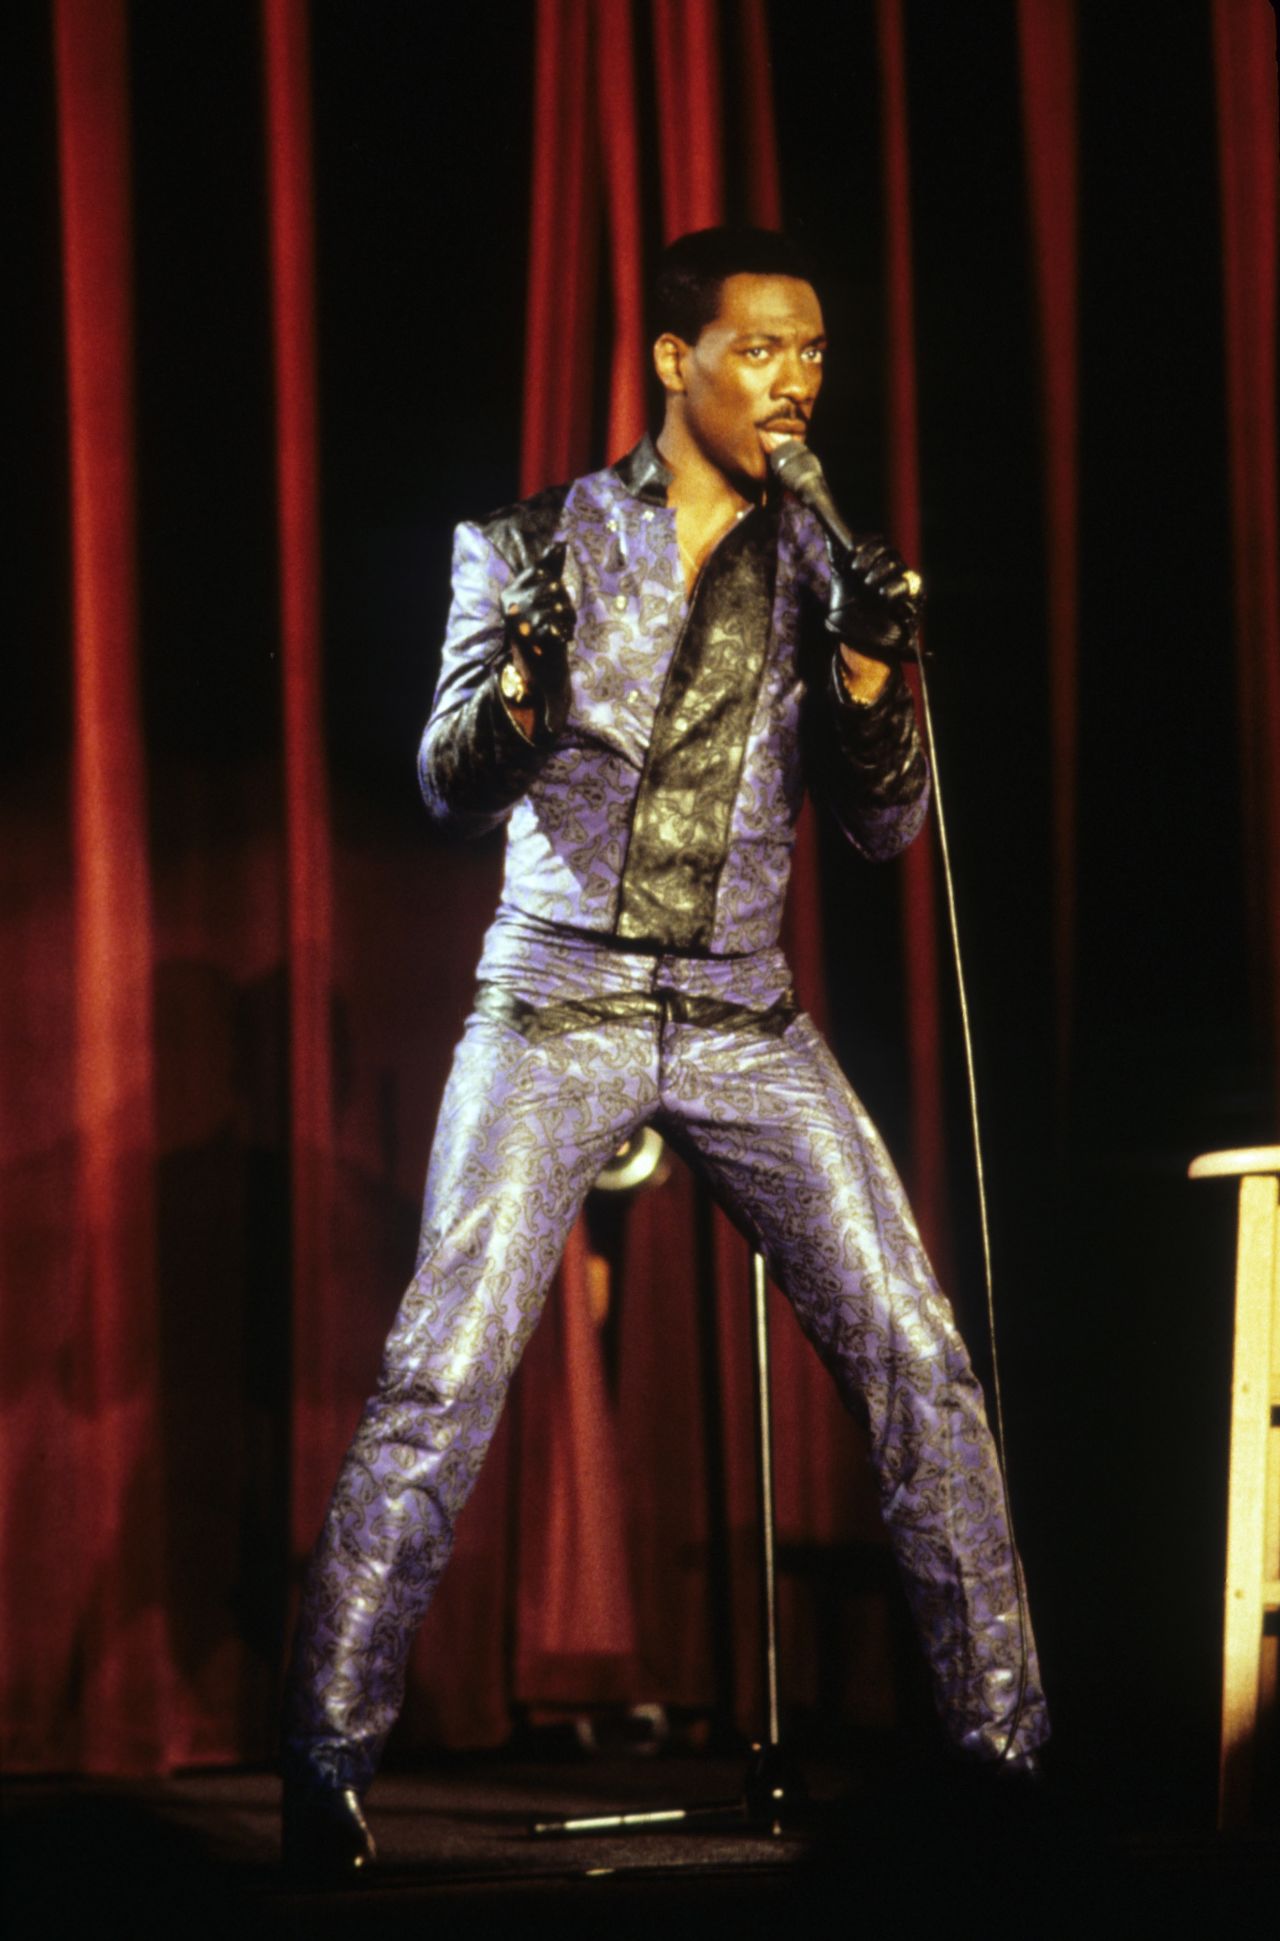 Murphy started making a name for himself on the comedy circuit in the early 1980s with his Richard Pryor-inspired stand-up and often polarizing shows. His 1987 film "Eddie Murphy Raw" — recorded at New York's Madison Square Garden — received a wide release and remains the top-grossing stand-up comedy movie of all time, earning more than $50 million.